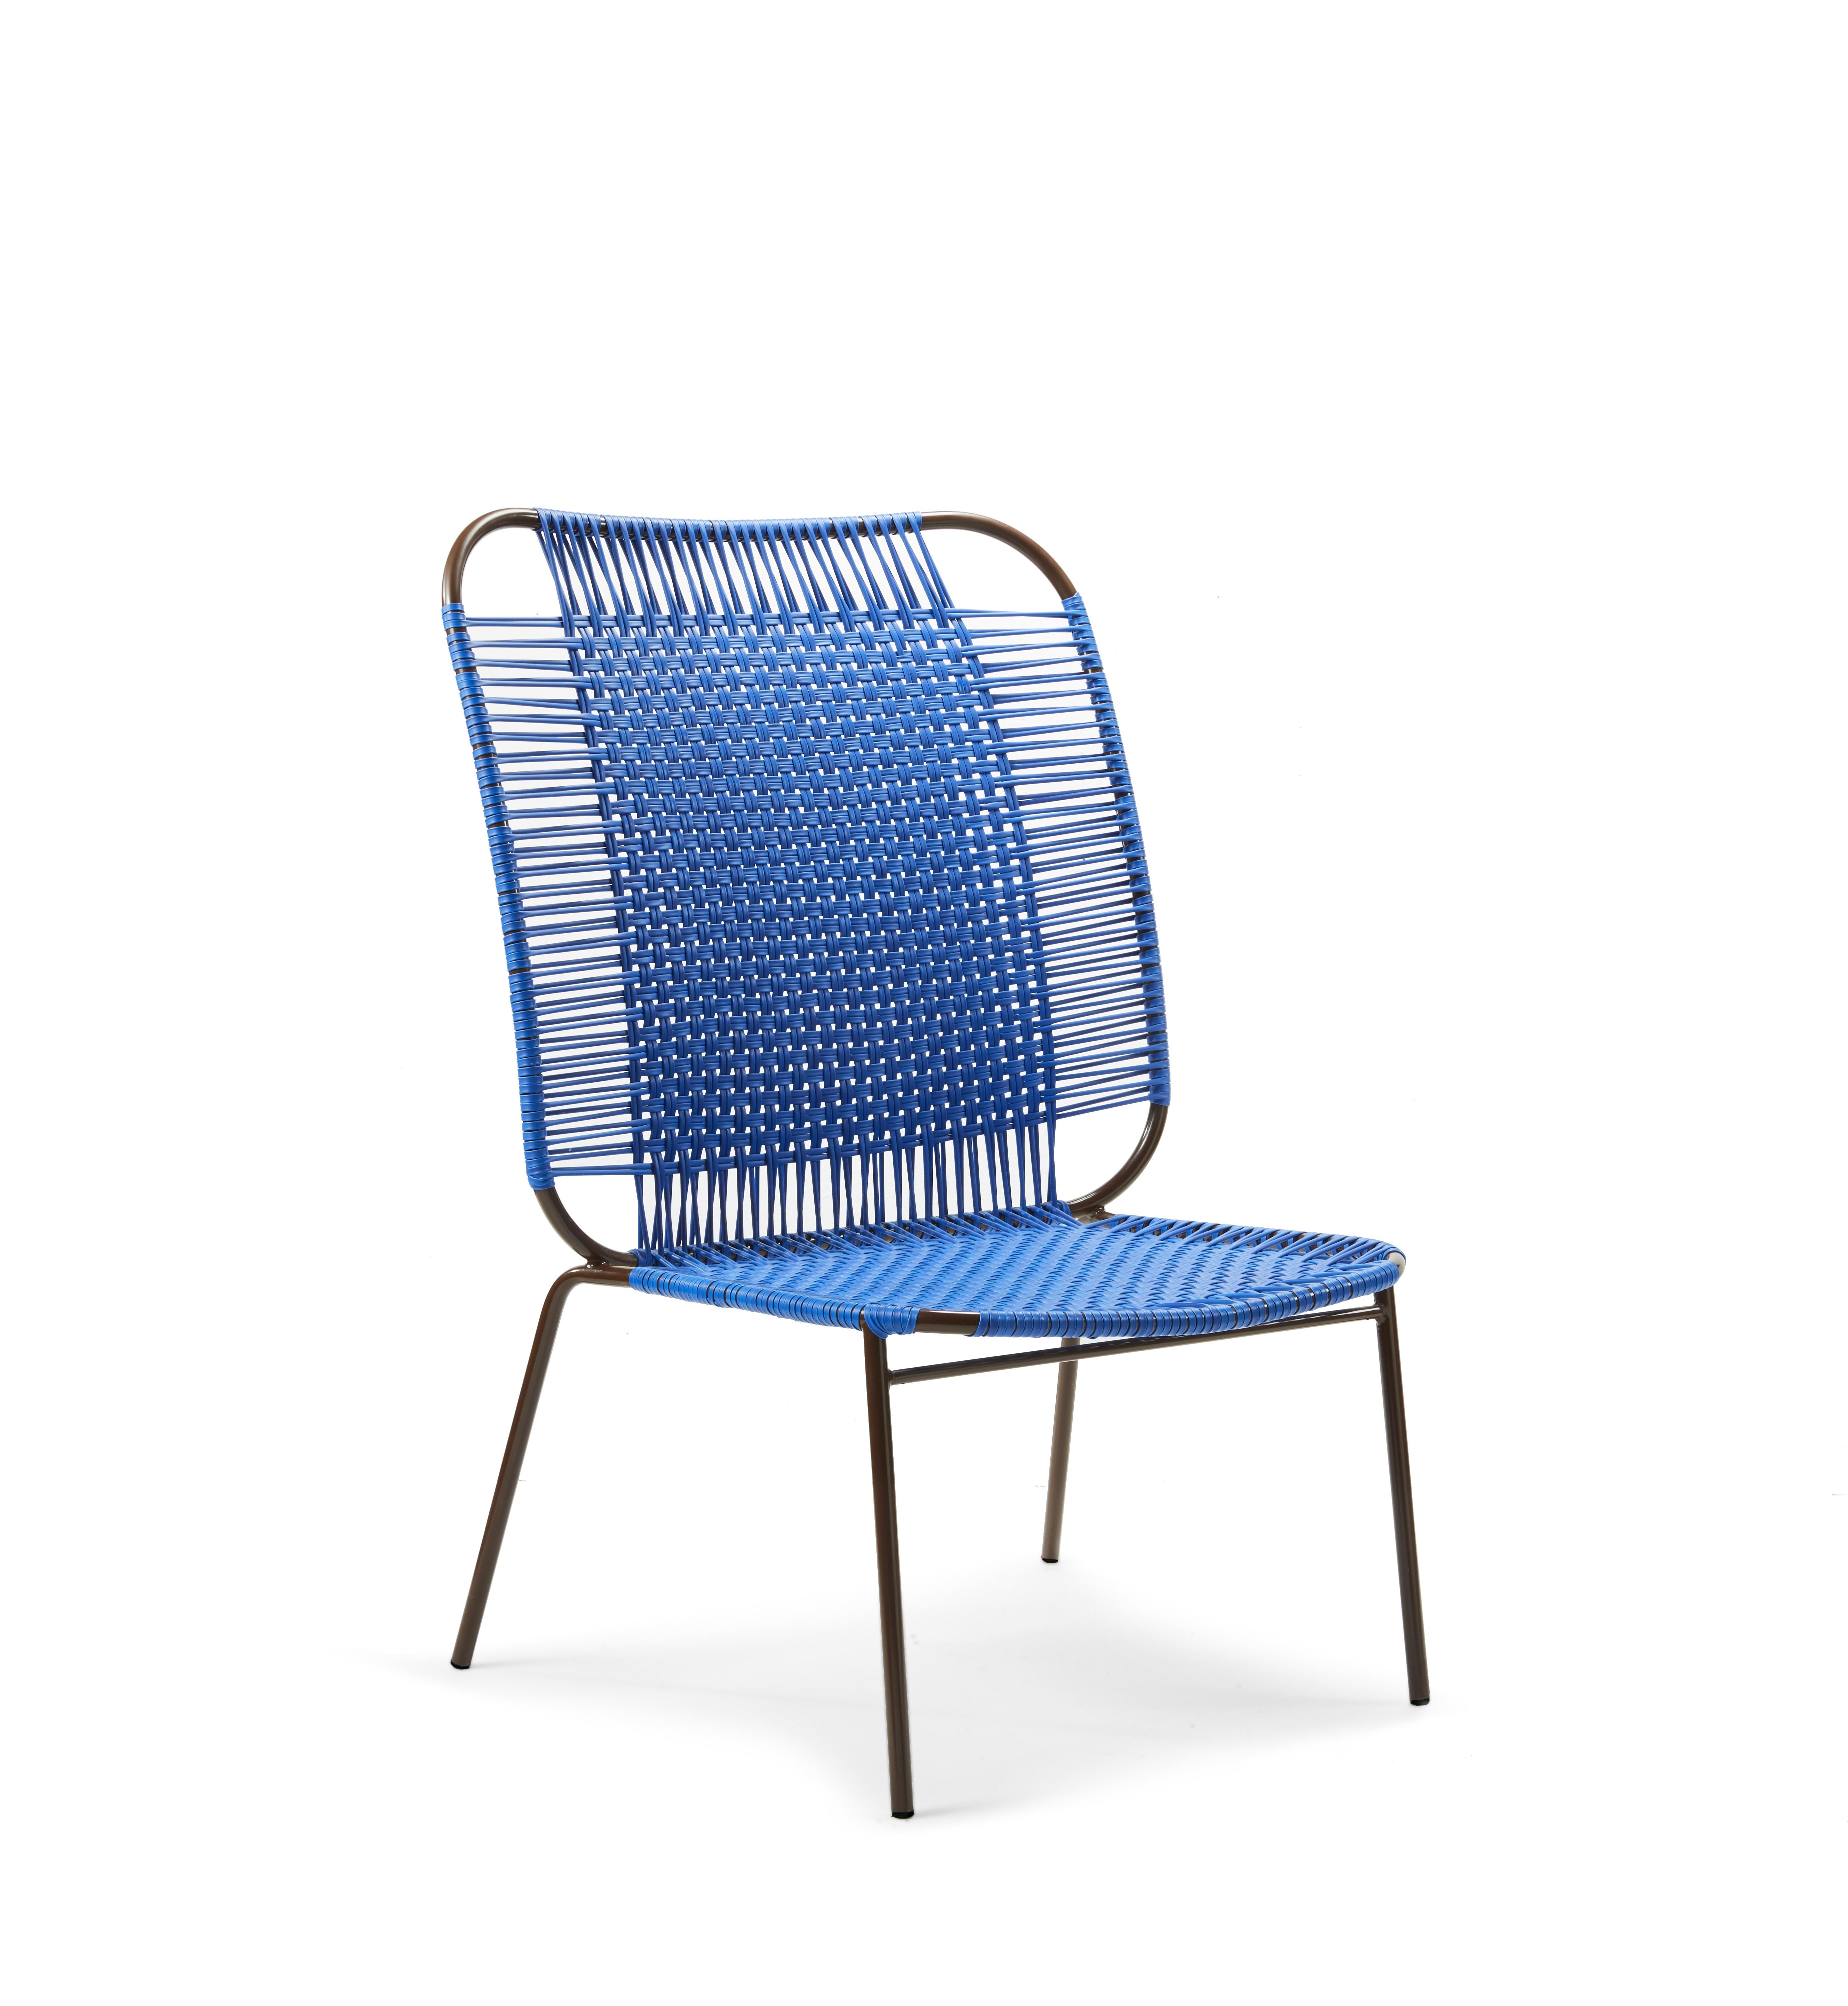 Set of 4 Blue Cielo lounge high chair by Sebastian Herkner
Materials: Galvanized and powder-coated tubular steel. PVC strings are made from recycled plastic.
Technique: Made from recycled plastic and weaved by local craftspeople in Cartagena,